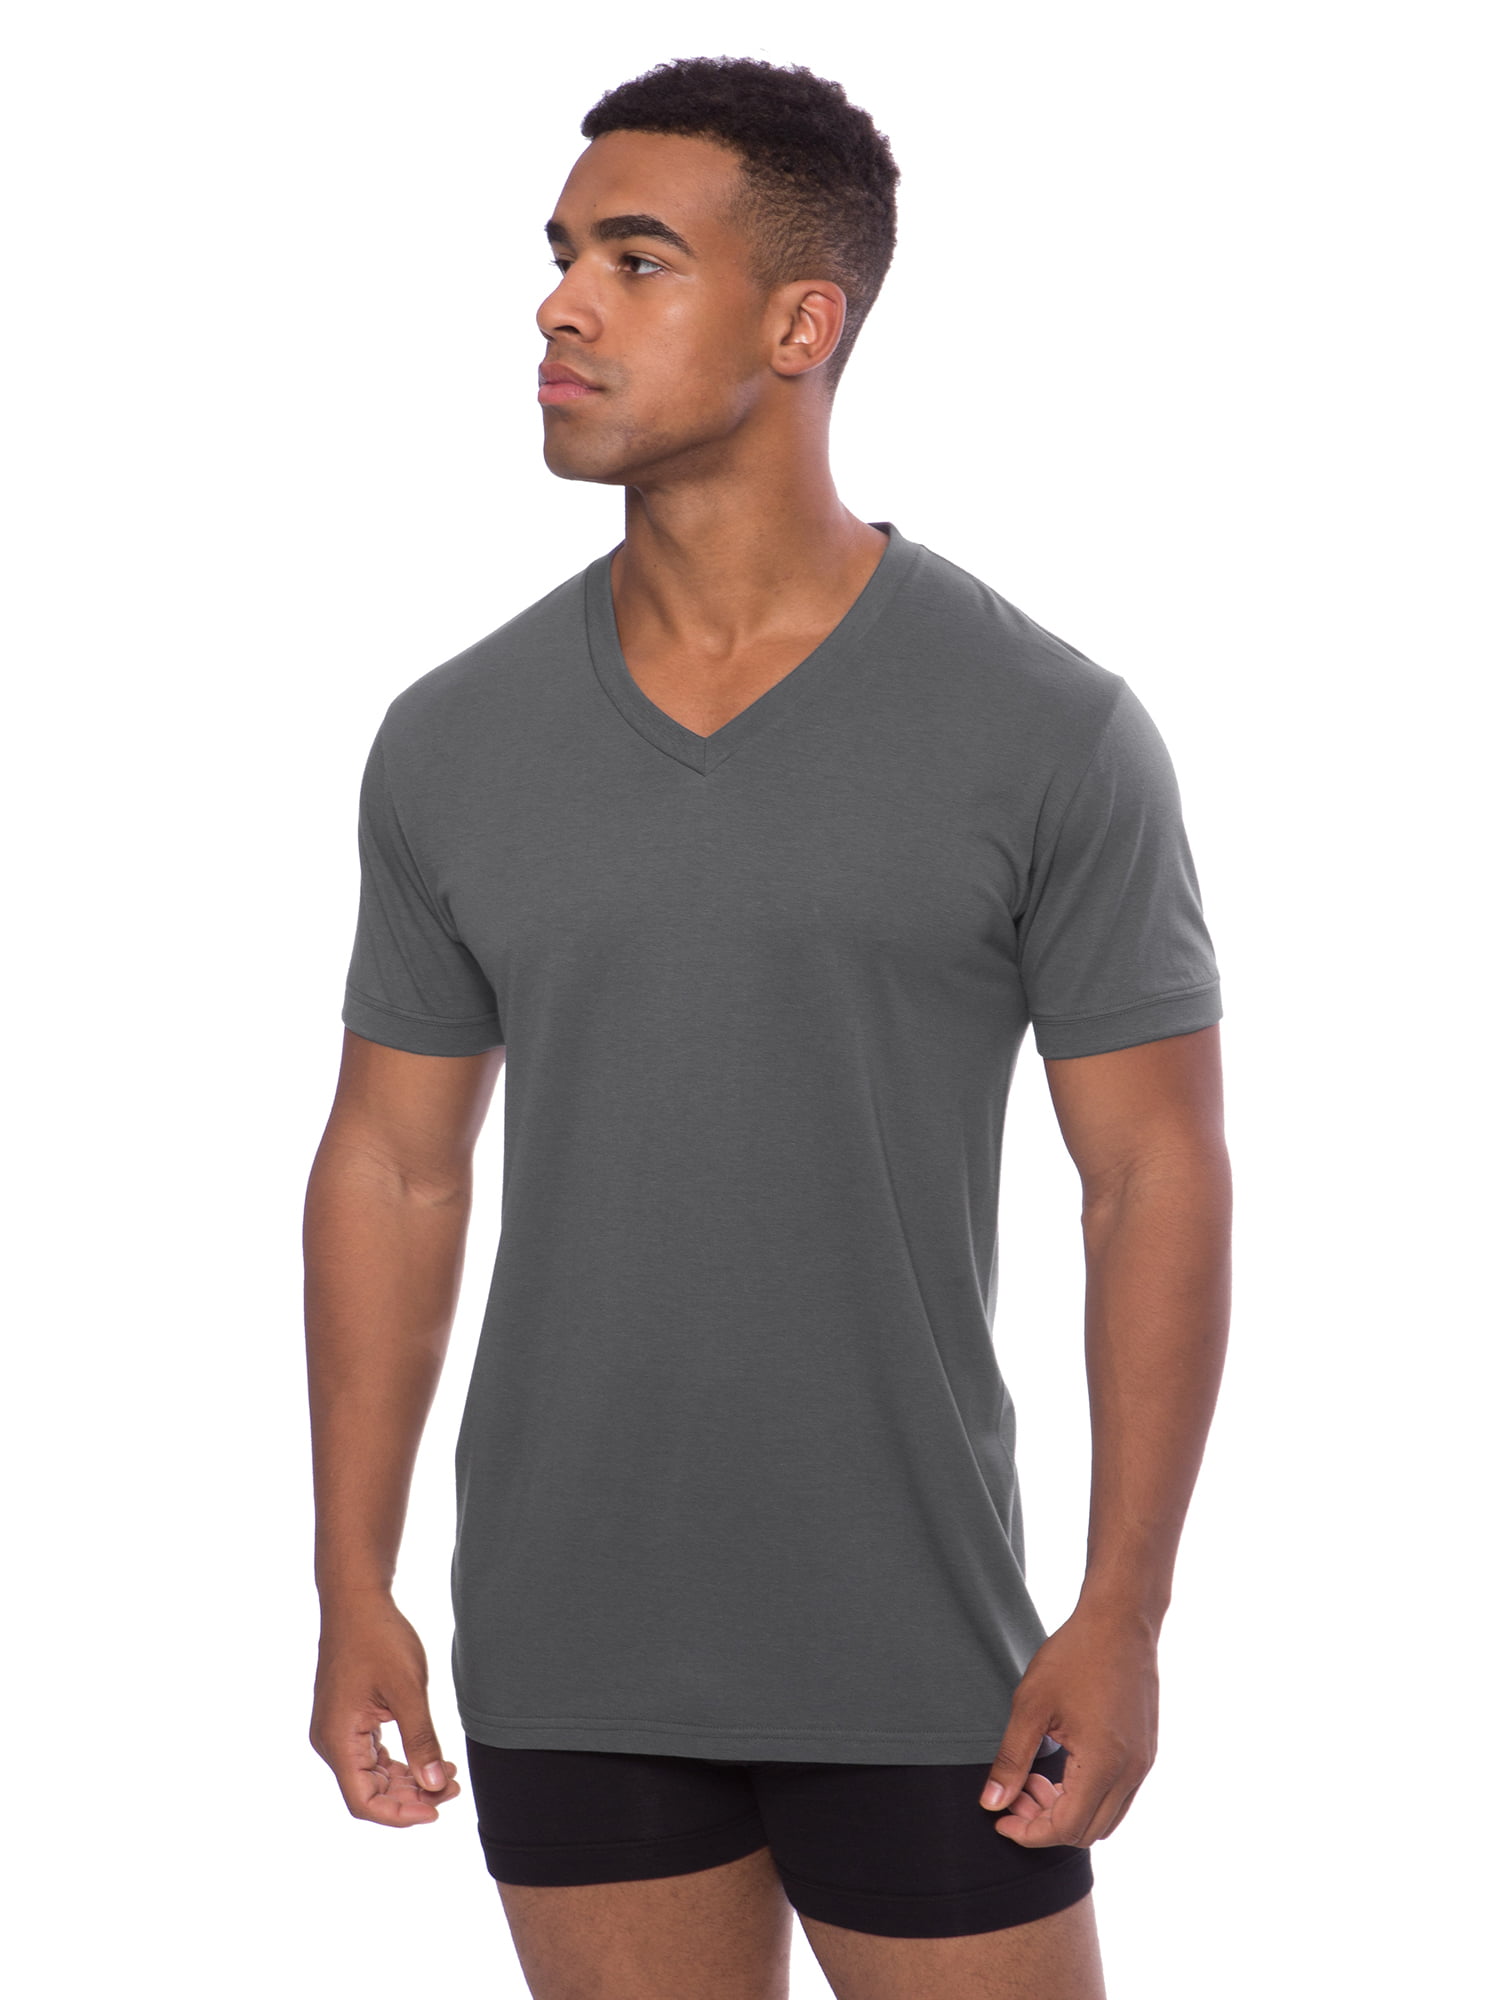 Texere Mens V-Neck Luxury Undershirt Meio Bamboo Viscose 2 Pack Tee for Him 